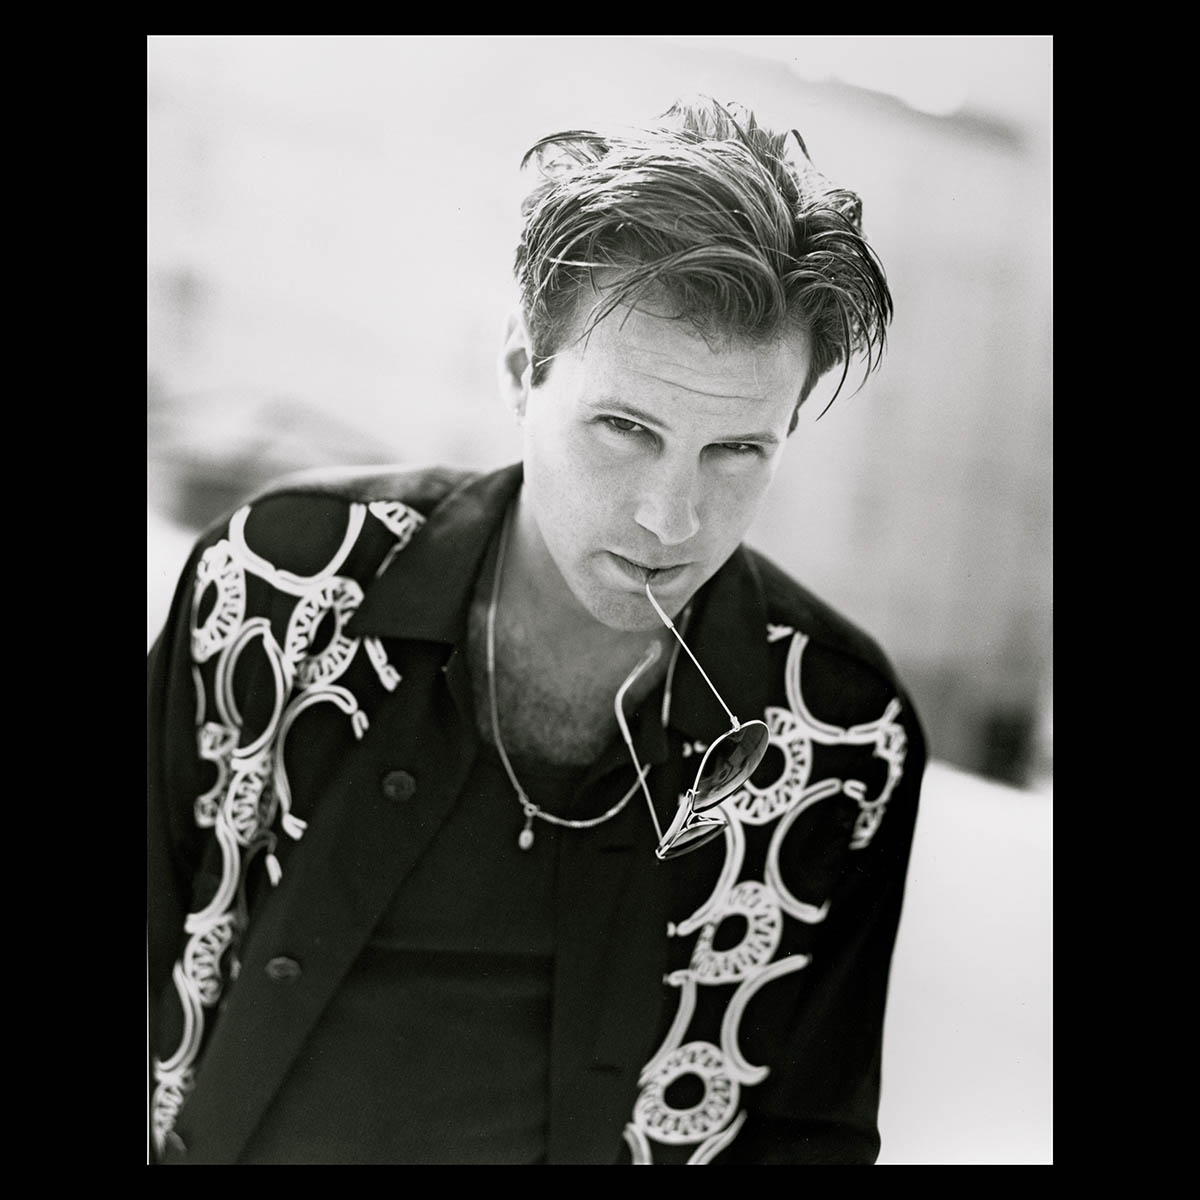 ME 45th Congratulations from Corey Hart